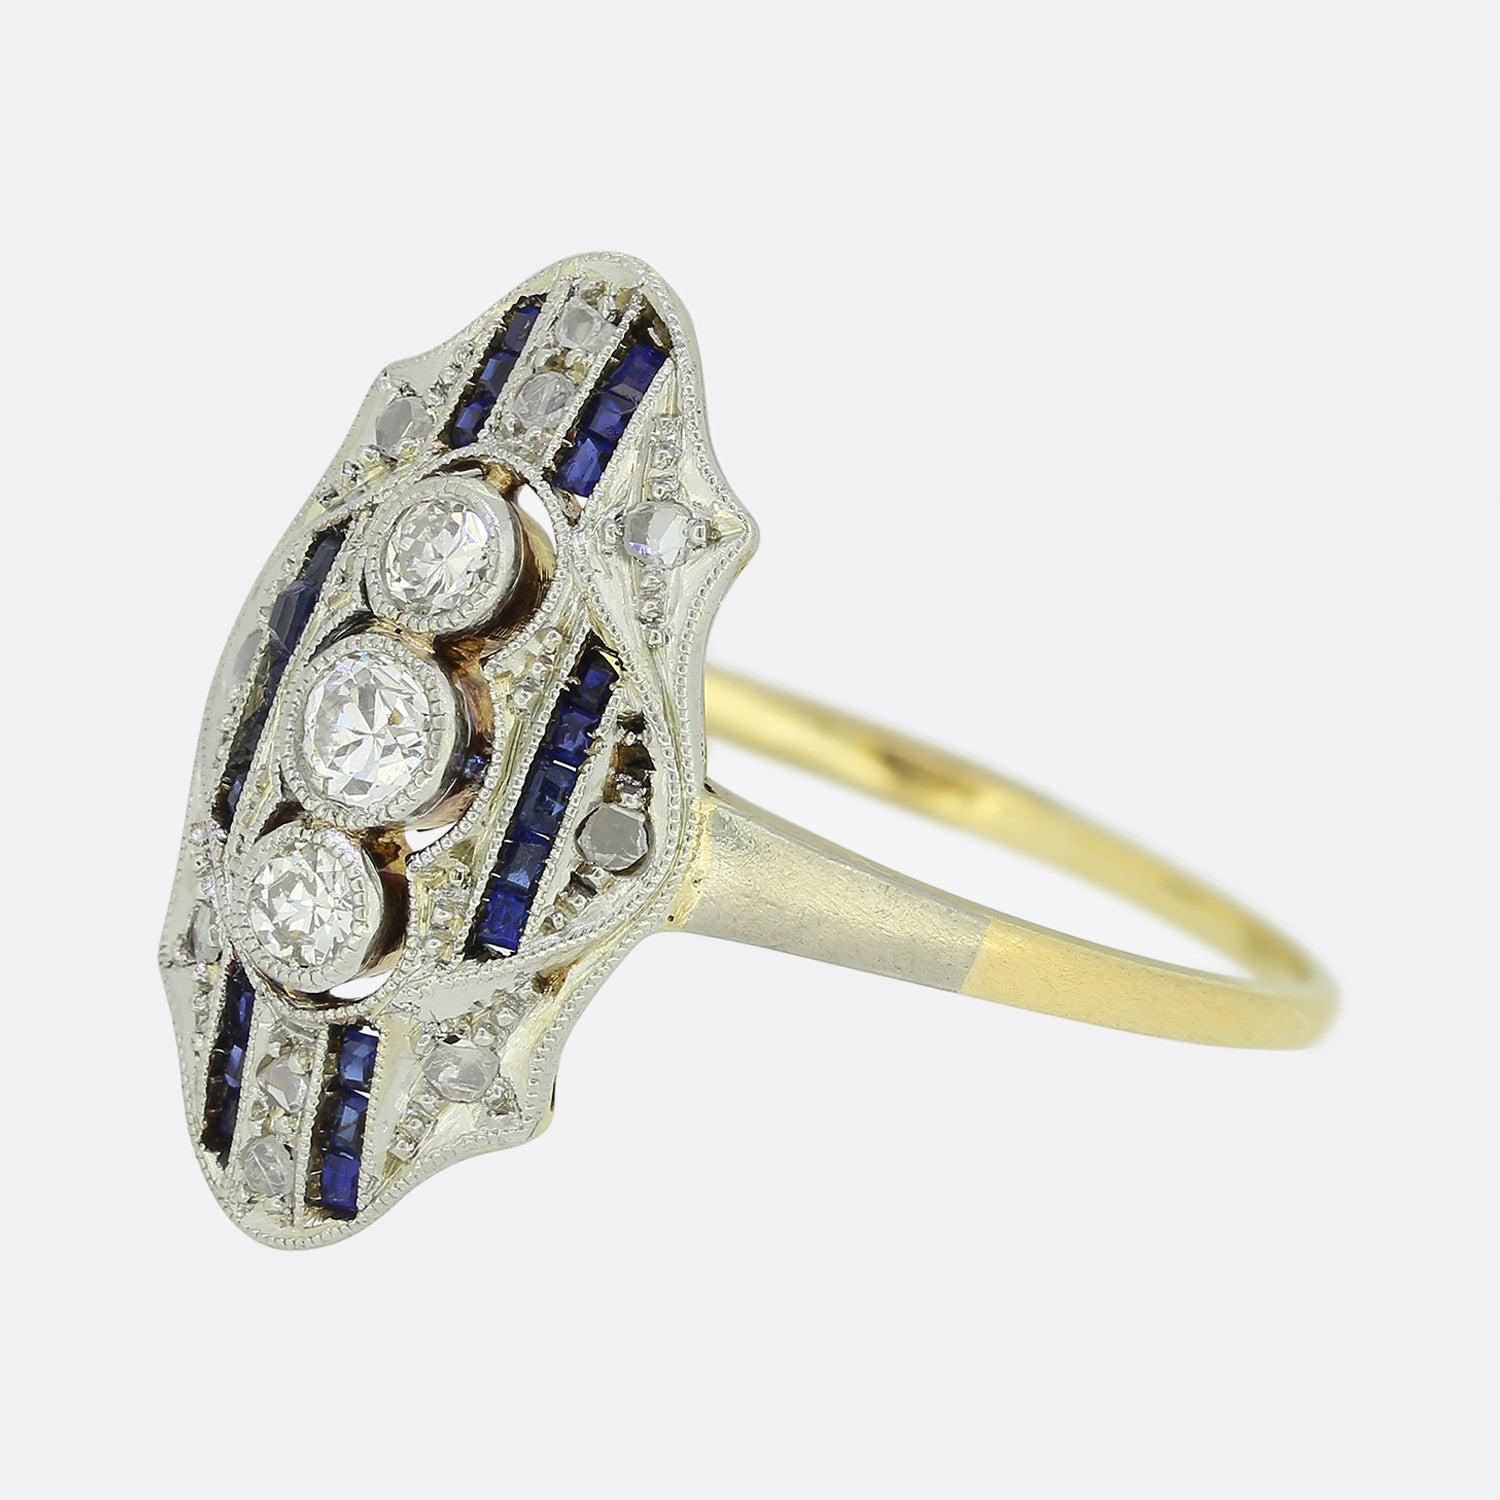 Here we have an excellently crafted sapphire and diamond ring from a time when the Art Deco style was at the forefront of design. This three-dimensional piece presents a trio of openly milgrain set round brilliant cut diamonds in a vertical line